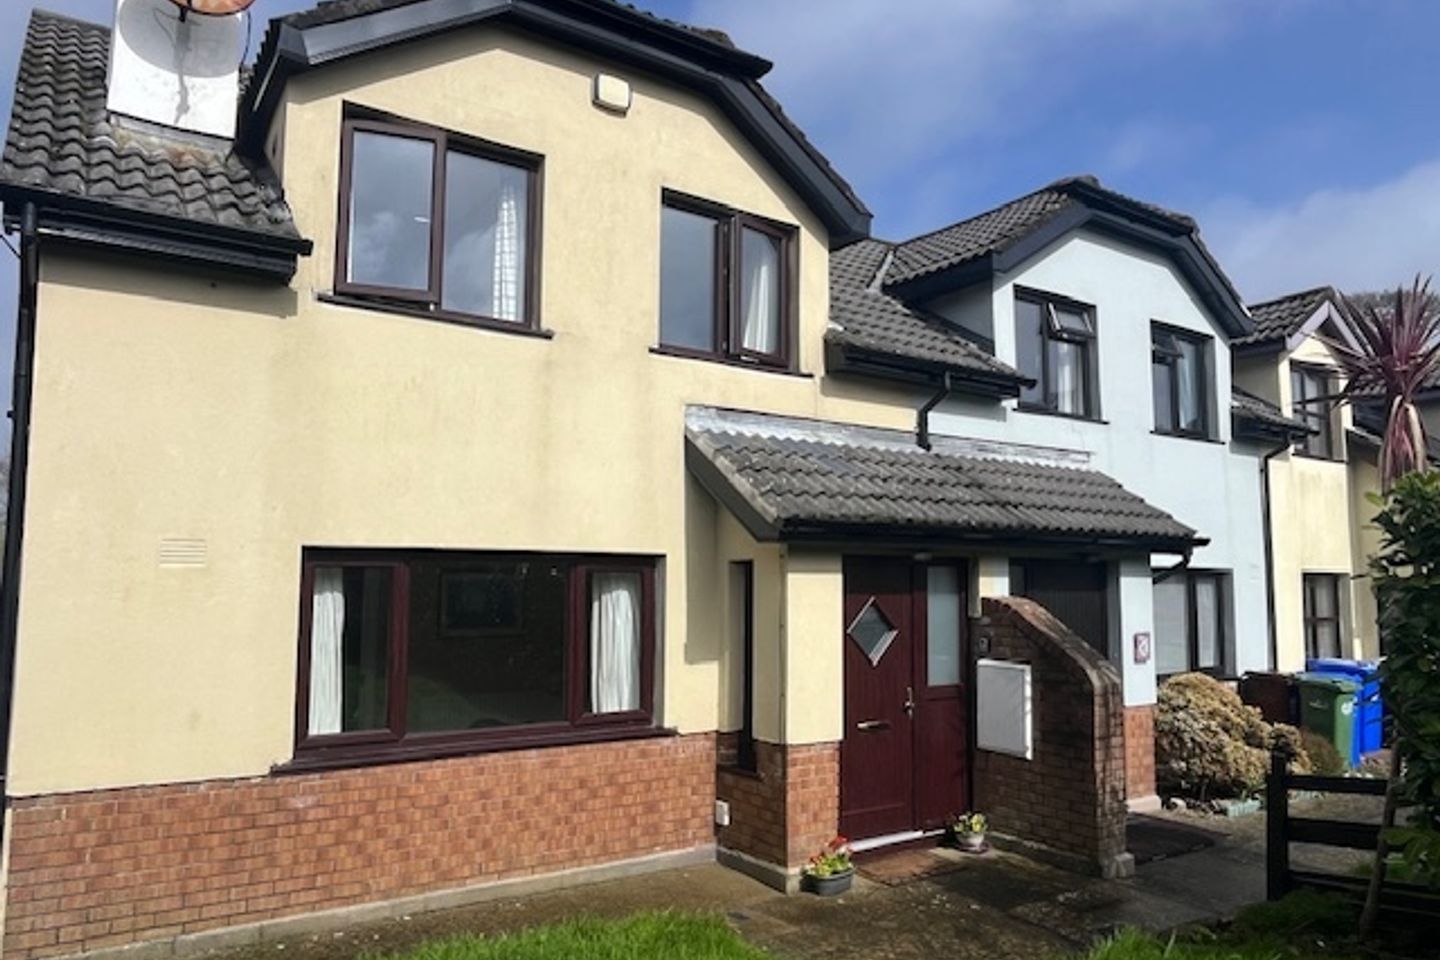 38 Cromwellsfort Court, Mulgannon, Wexford Town, Co. Wexford, Y35T0H7